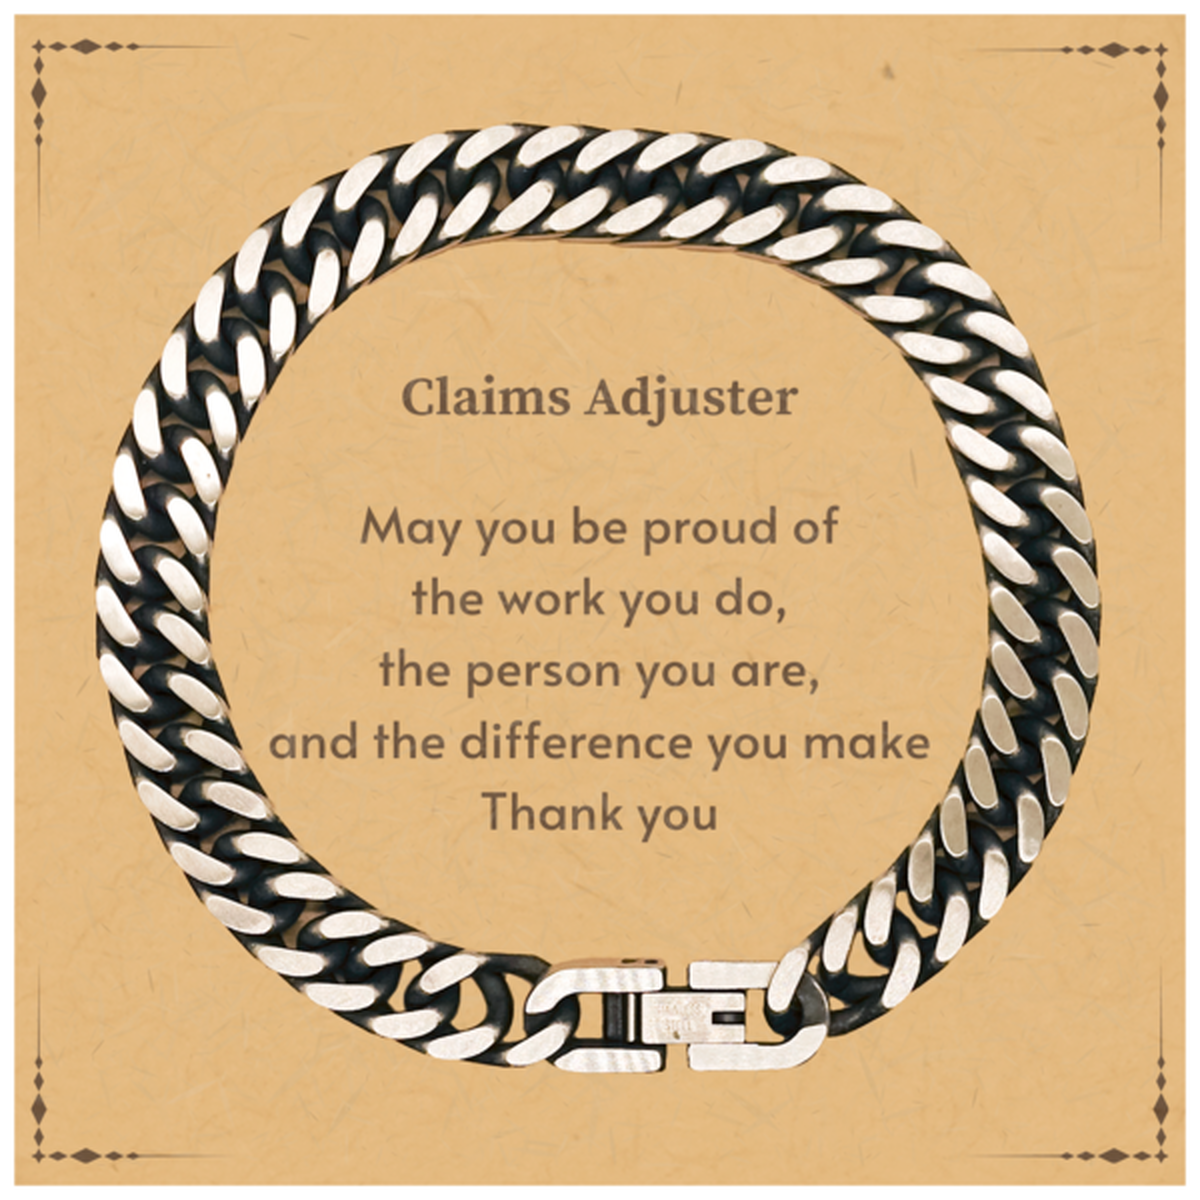 Heartwarming Cuban Link Chain Bracelet Retirement Coworkers Gifts for Claims Adjuster, Claims Adjuster May You be proud of the work you do, the person you are Gifts for Boss Men Women Friends